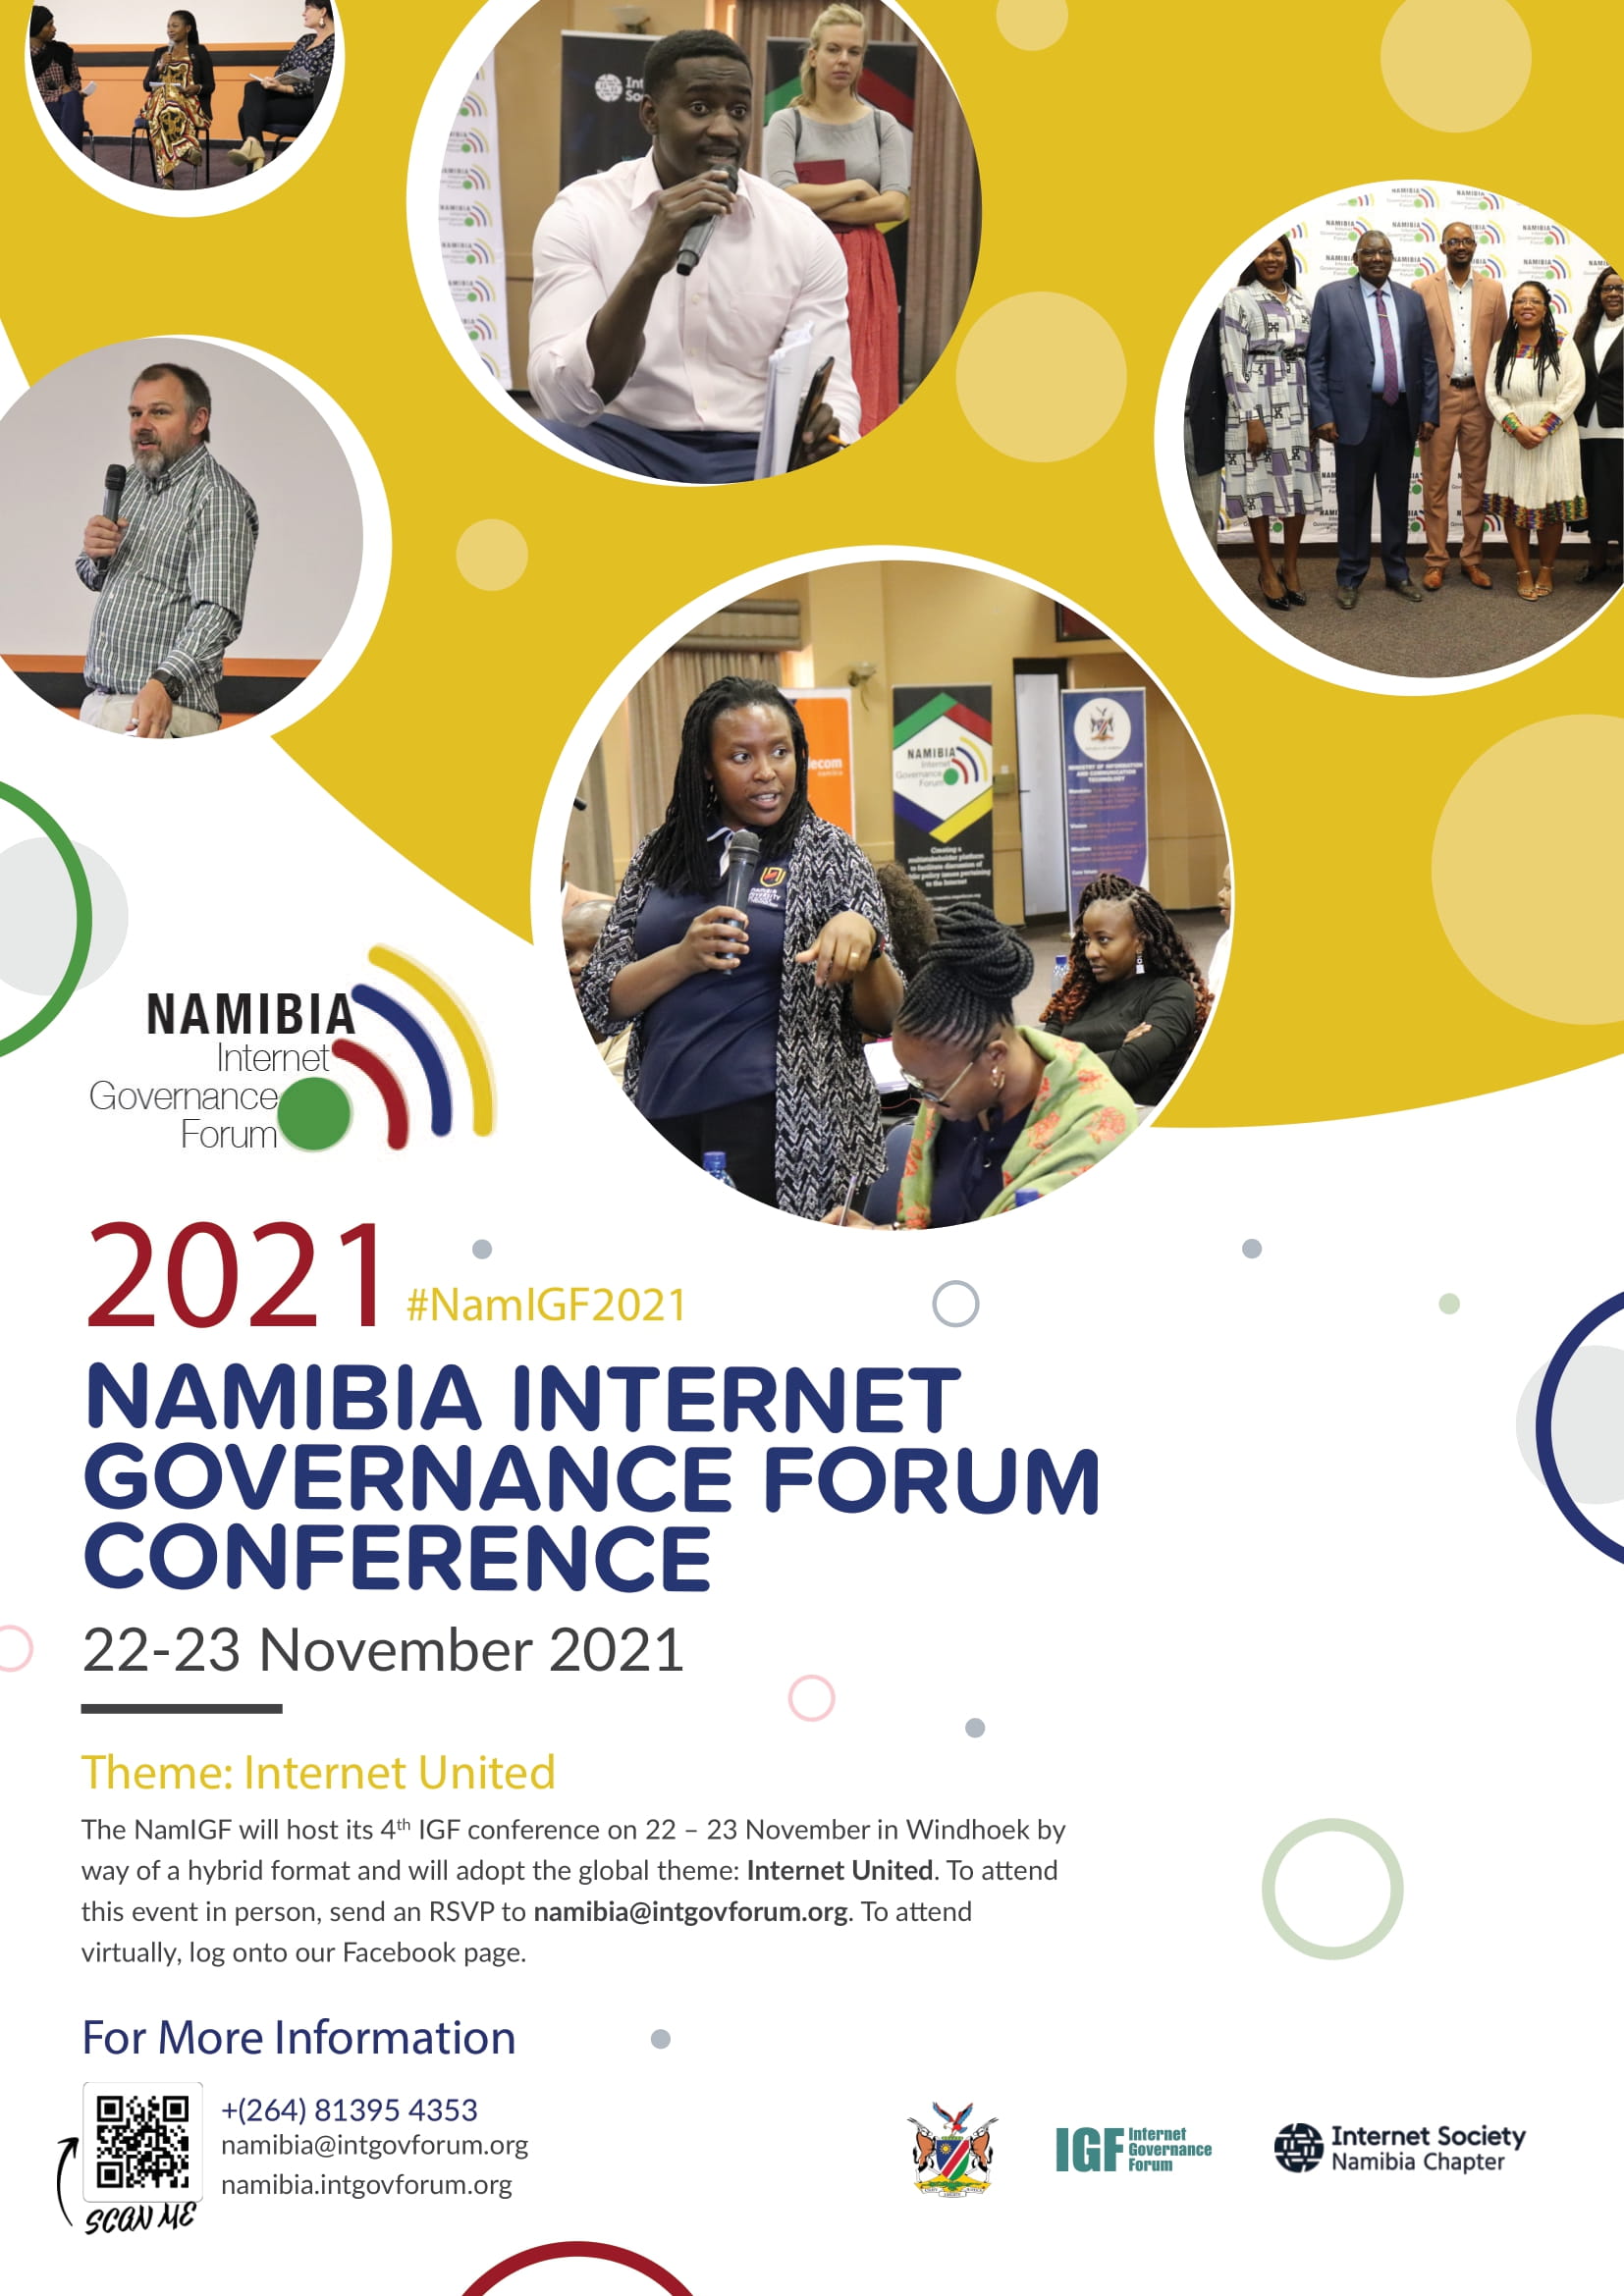 NAMIGF 2021 Conference Poster 1